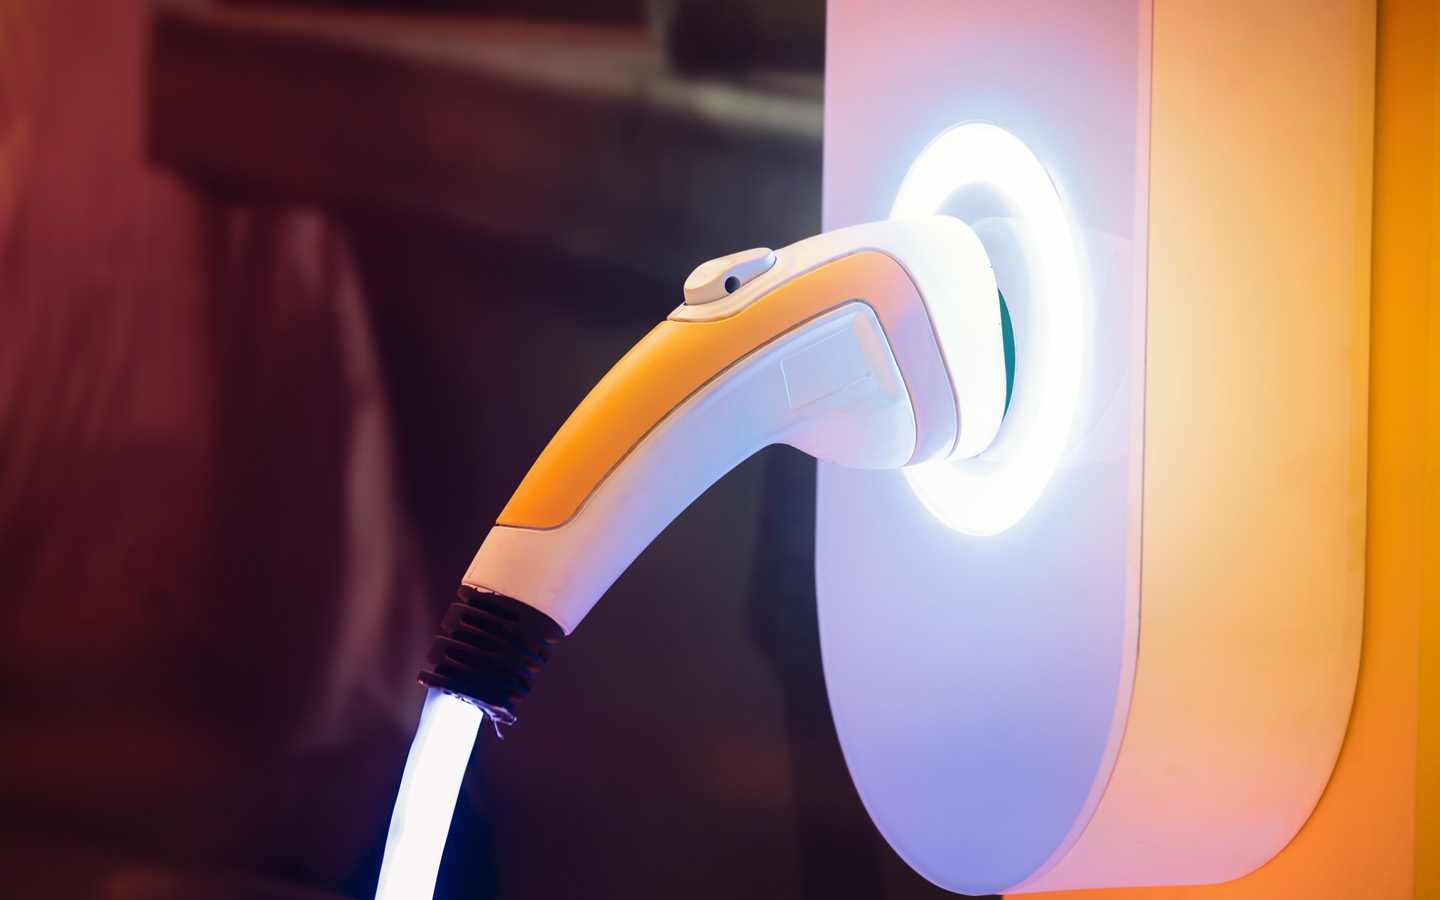 to charge an electric car at home, keep a check on the charging light as it indicates charging has started